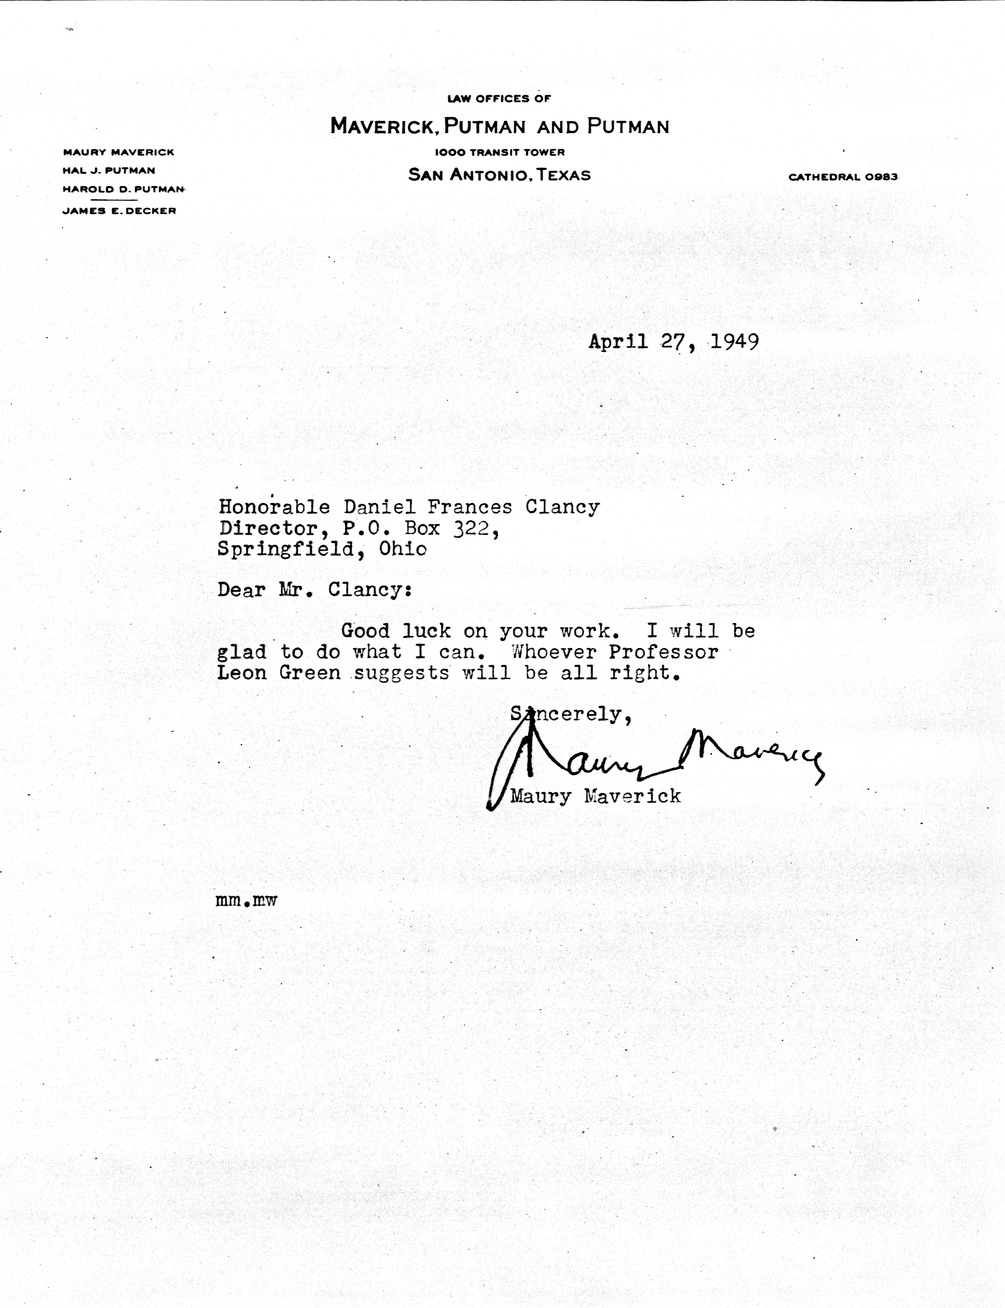 Letter from Maury Maverick to Daniel F. Clancy